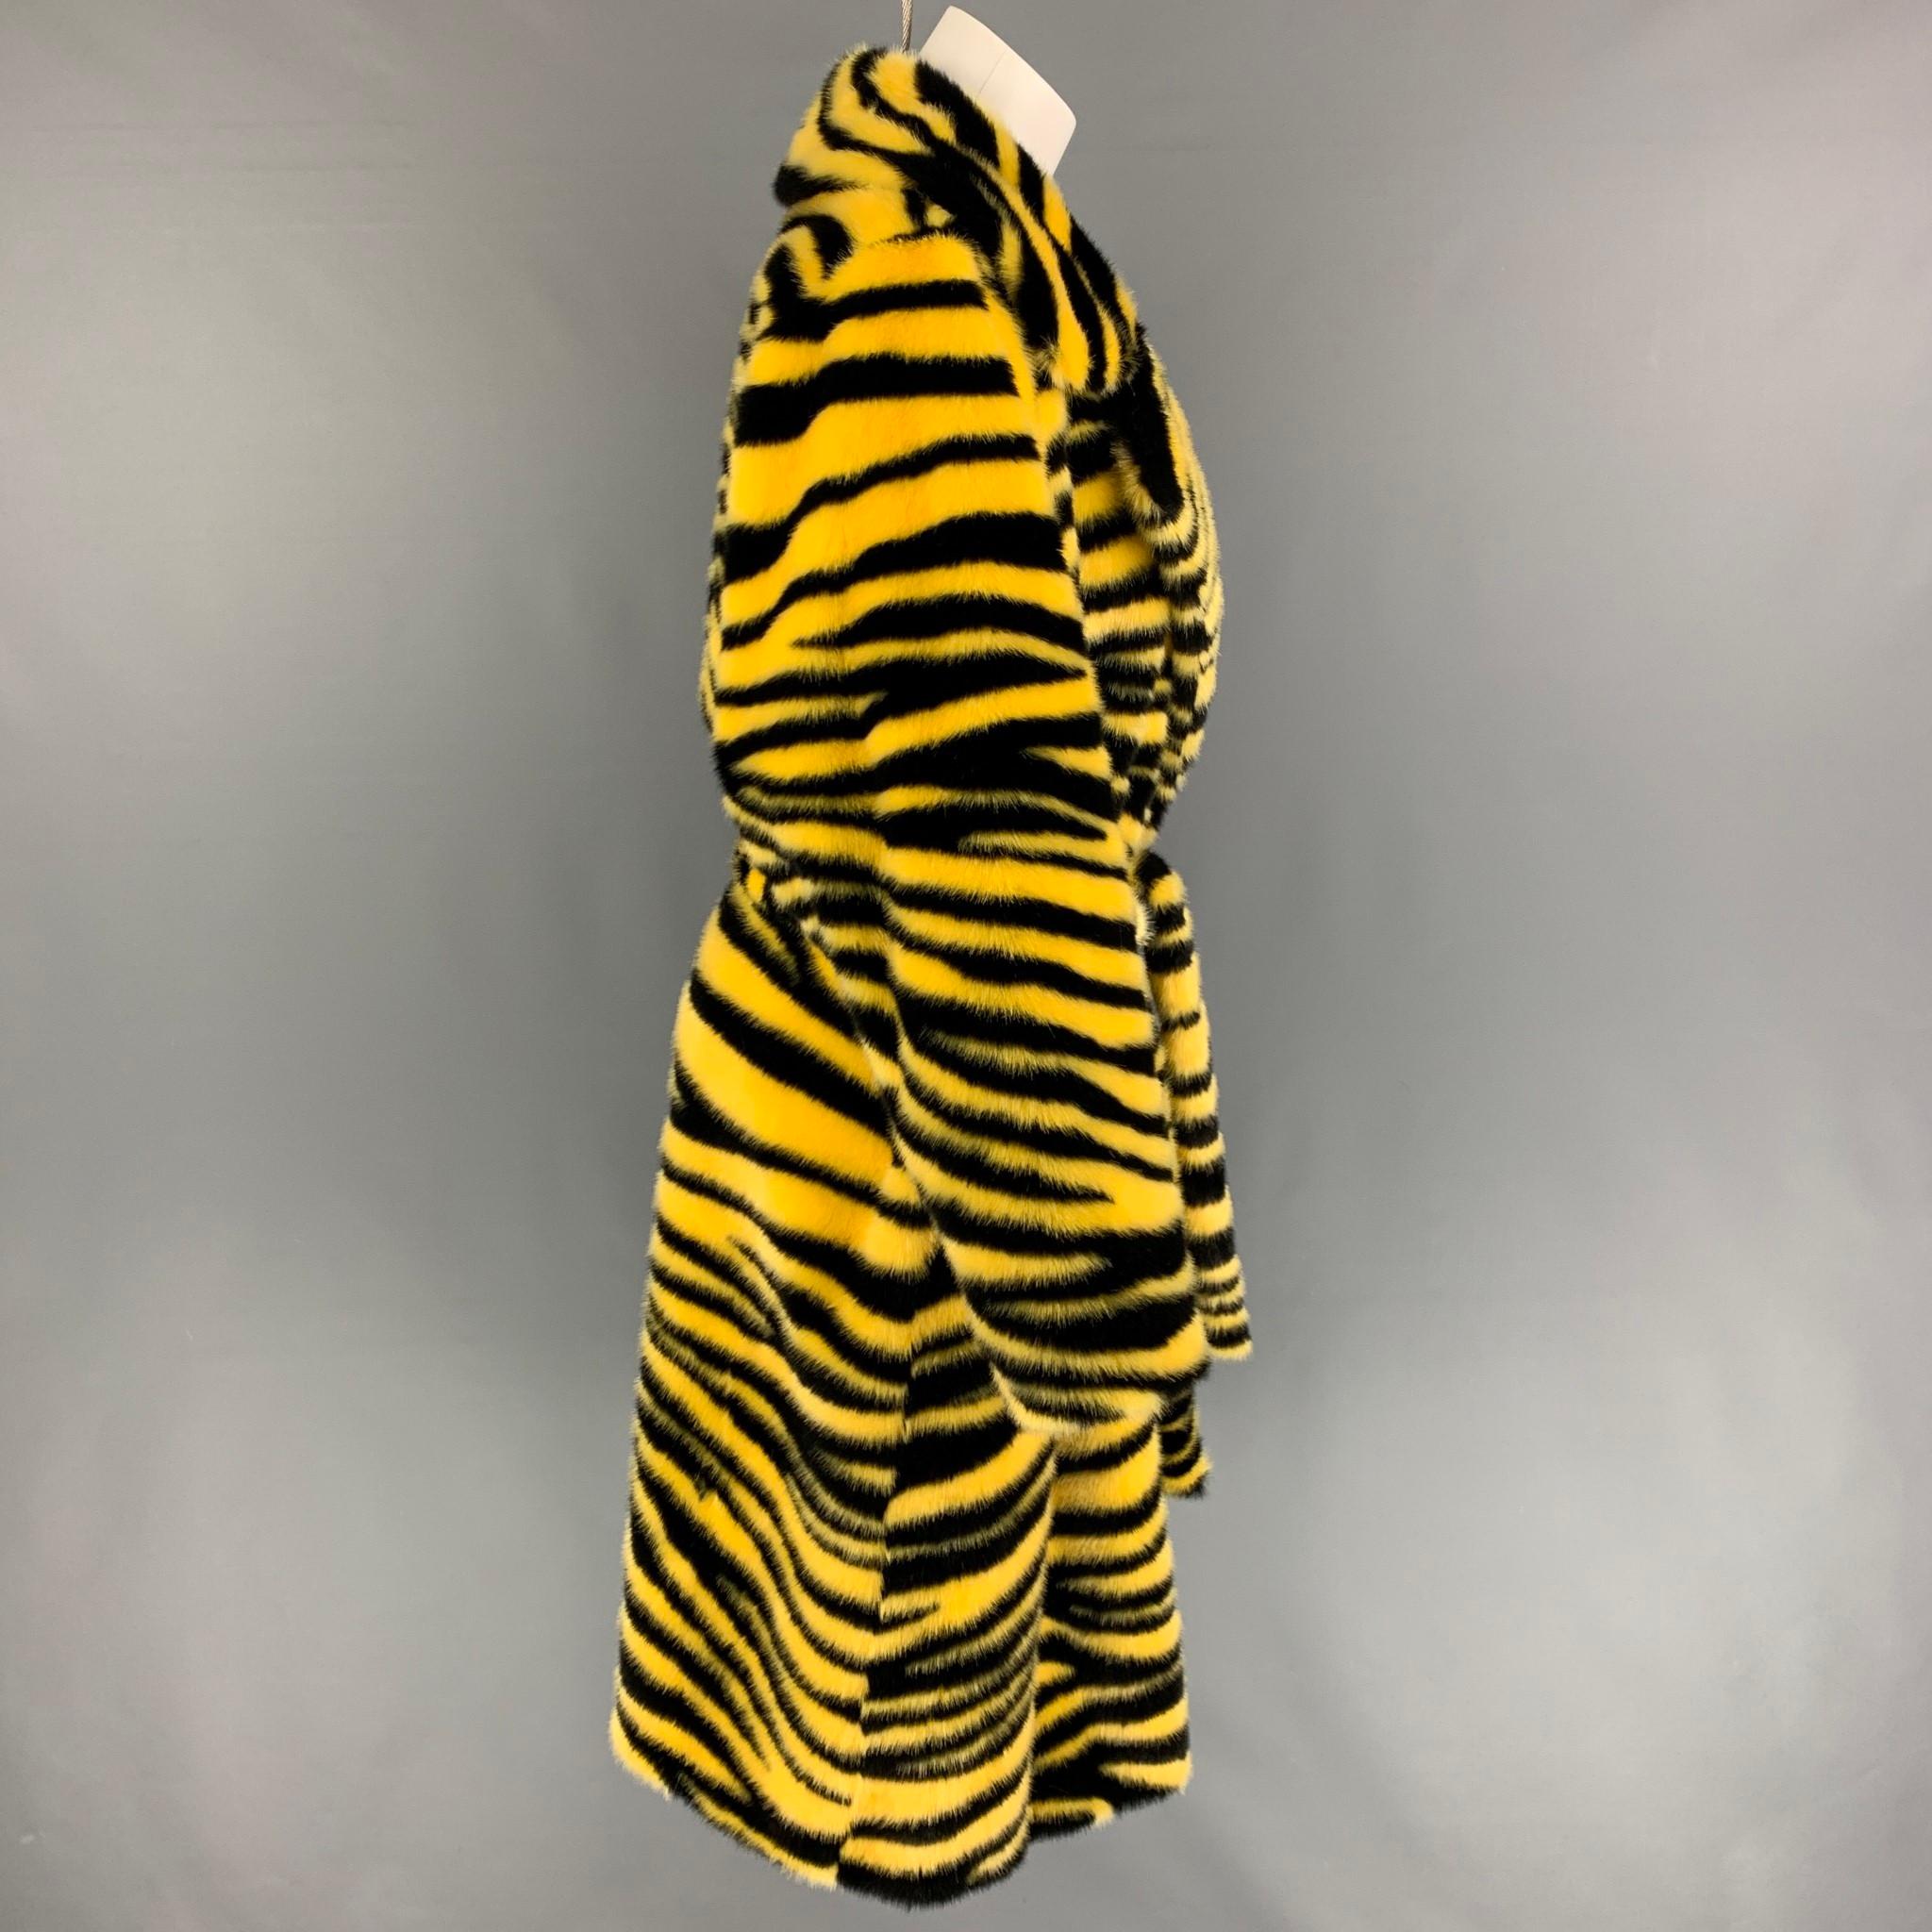 STAND STUDIO AW 20 'Crystal' coat comes in a yellow & black zebra print faux fur featuring a notch lapel, slit pockets, belted, and a double breasted closure. 

New With Tags. 
Marked: 36

Measurements:

Shoulder: 16 in.
Bust: 42 in.
Sleeve: 23